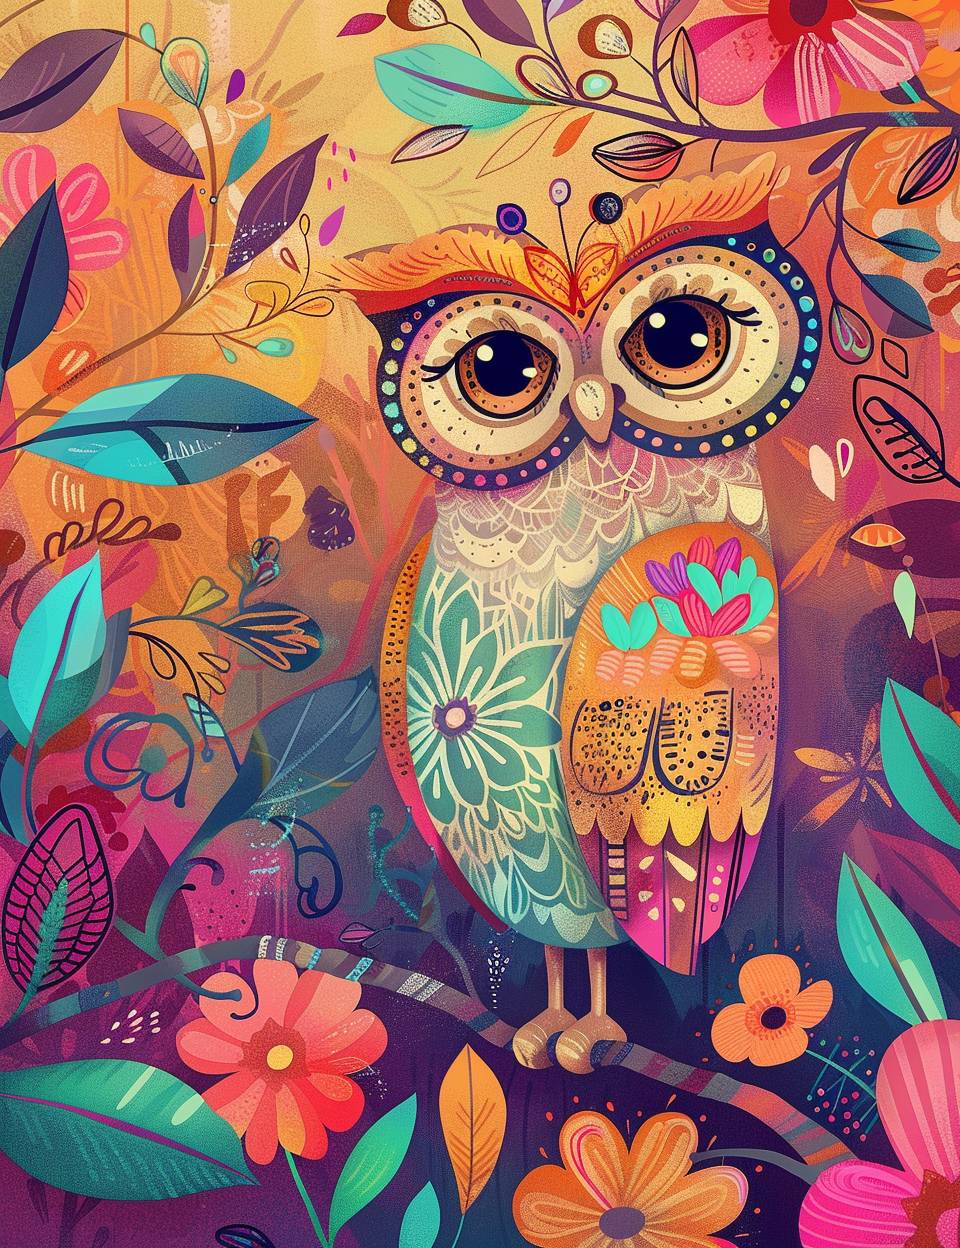 Create a whimsical illustration featuring a cartoonish owl on a colorful background, in the style of the vibrant, fairy-tale-like and children’s book illustrations. The medium should combine illustration with ephemera and doodle art elements. Use a color palette of warm tones--pinks, oranges, teals, and purples--with pops of bright floral hues. The art should have a playful, dreamlike quality, rich in patterns and fantasy motifs, capturing an enchanting, storybook essence and ephemera background.